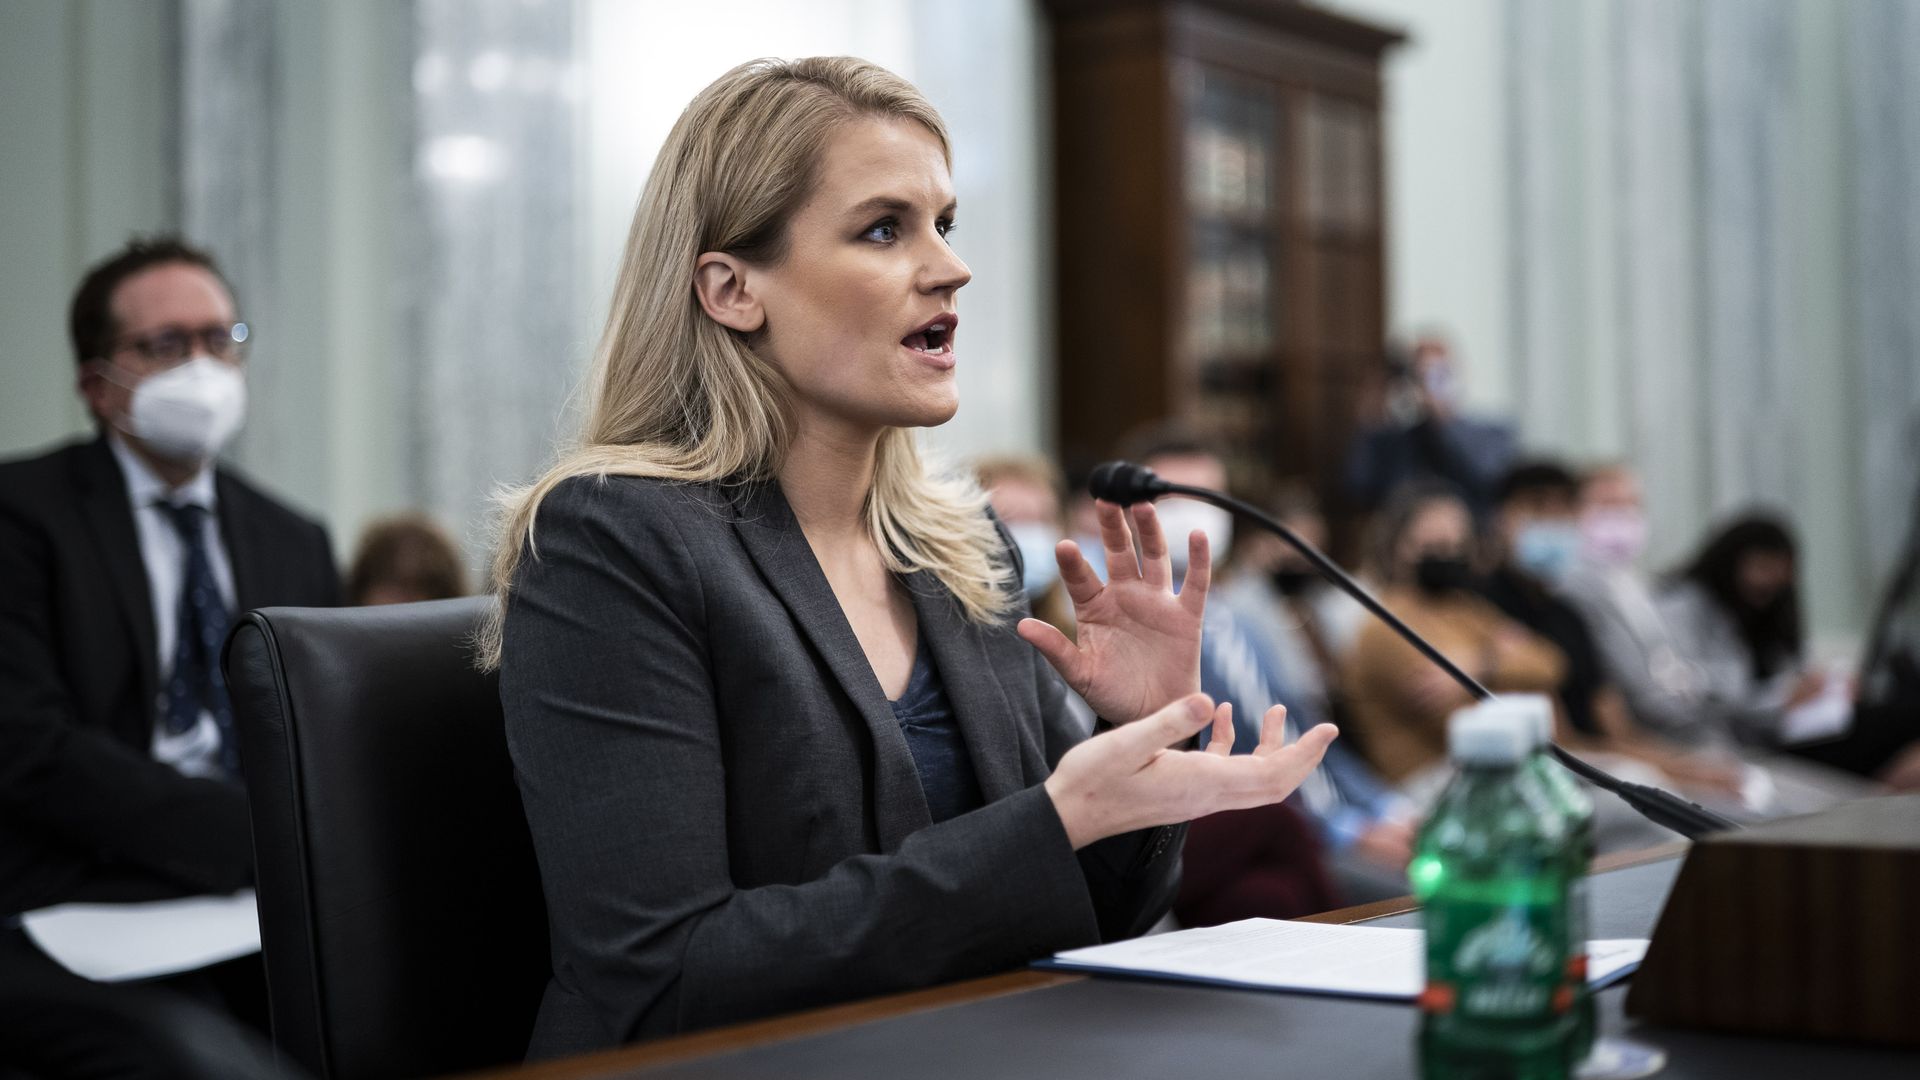 Former Facebook employee and whistleblower Frances Haugen testifies during a Senate Committee on Commerce, Science, and Transportation hearing.